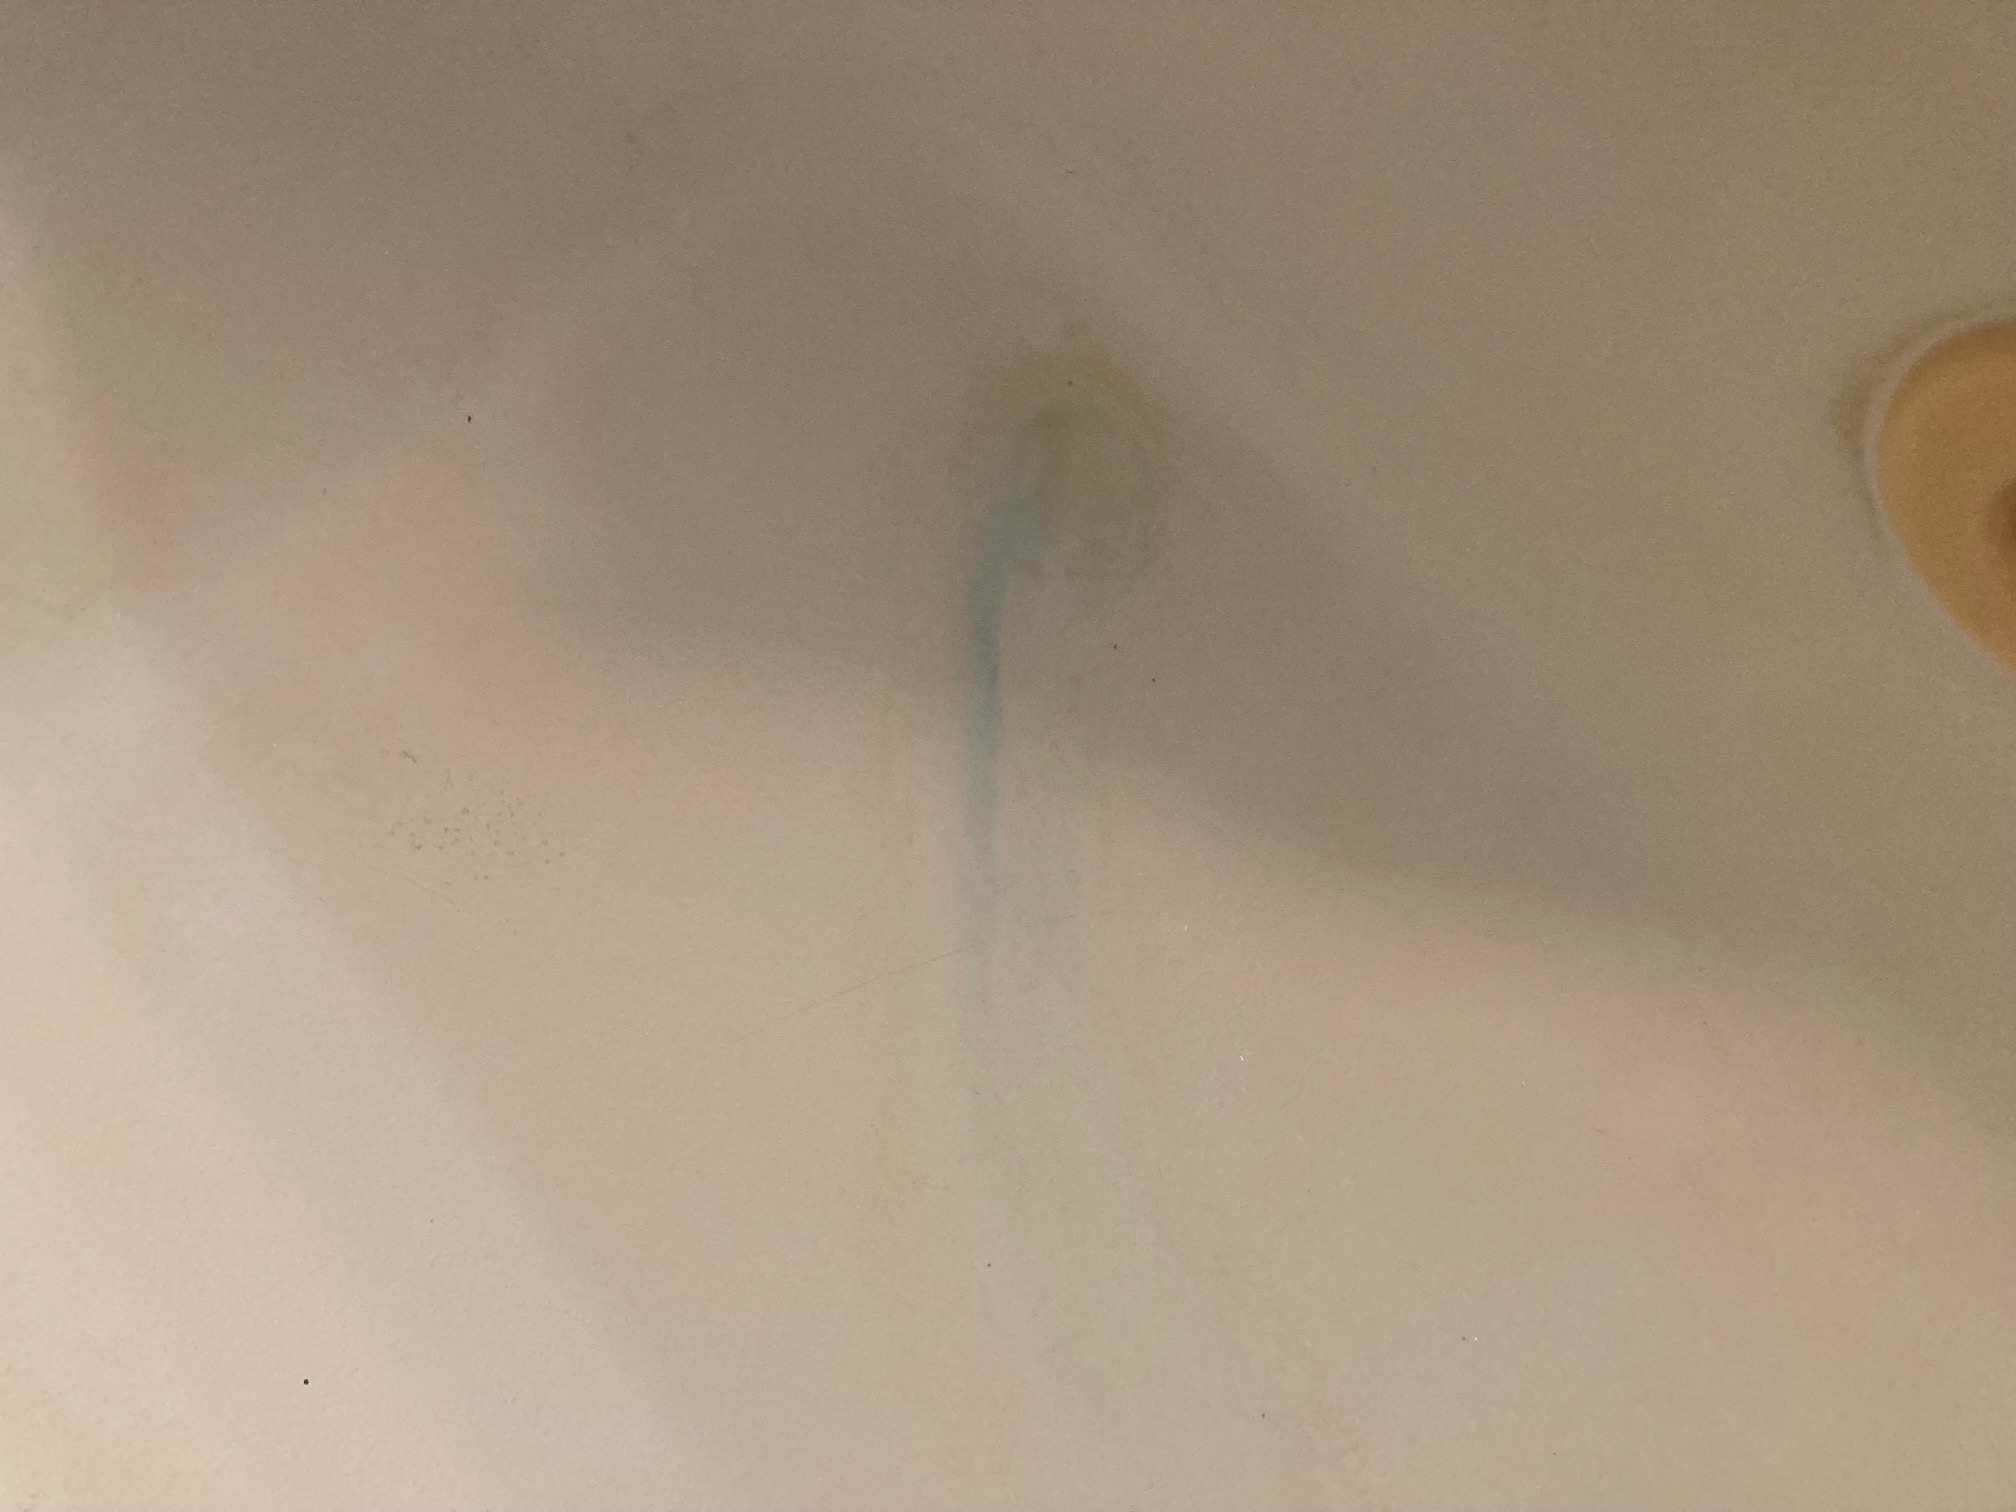 Copper stain in tub post treatment